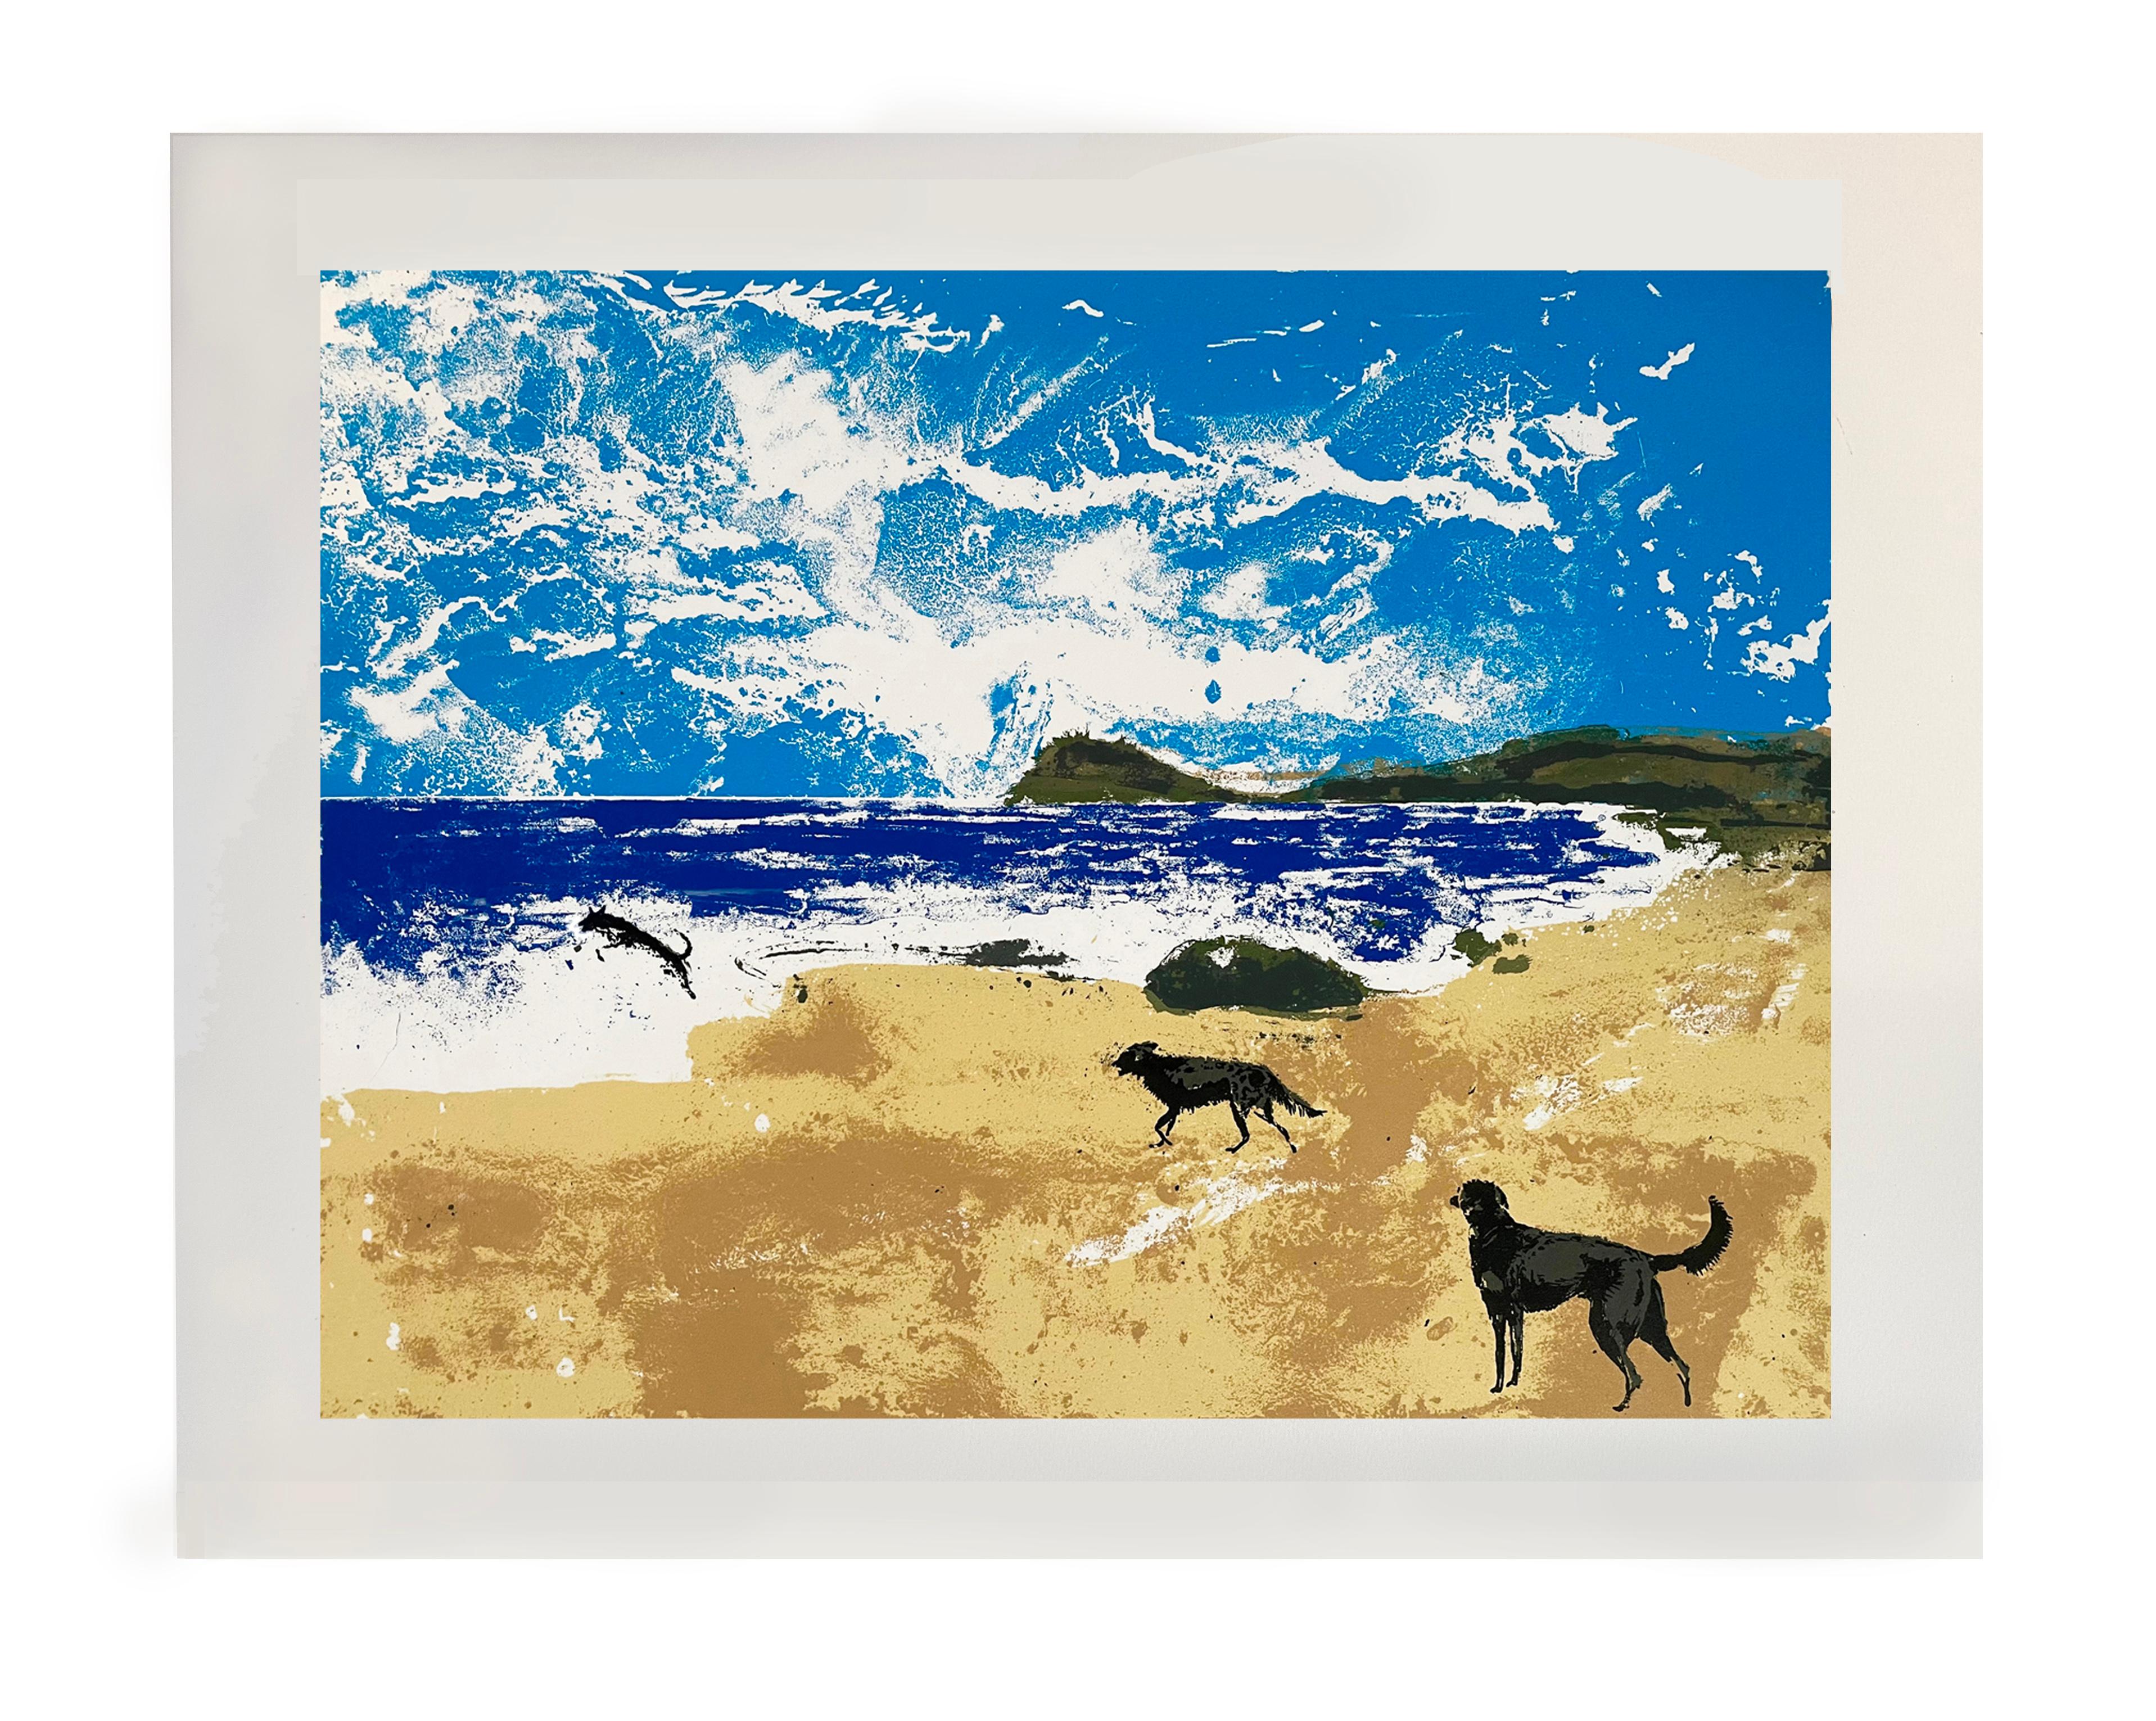 Three dogs have fun on a deserted beach. This 6 colour silkscreen is made on a heavyweight 300 gram handmade paper from St Cuthbert's Mill in Somerset. The print is created by printing each colour separately, gradually building up the